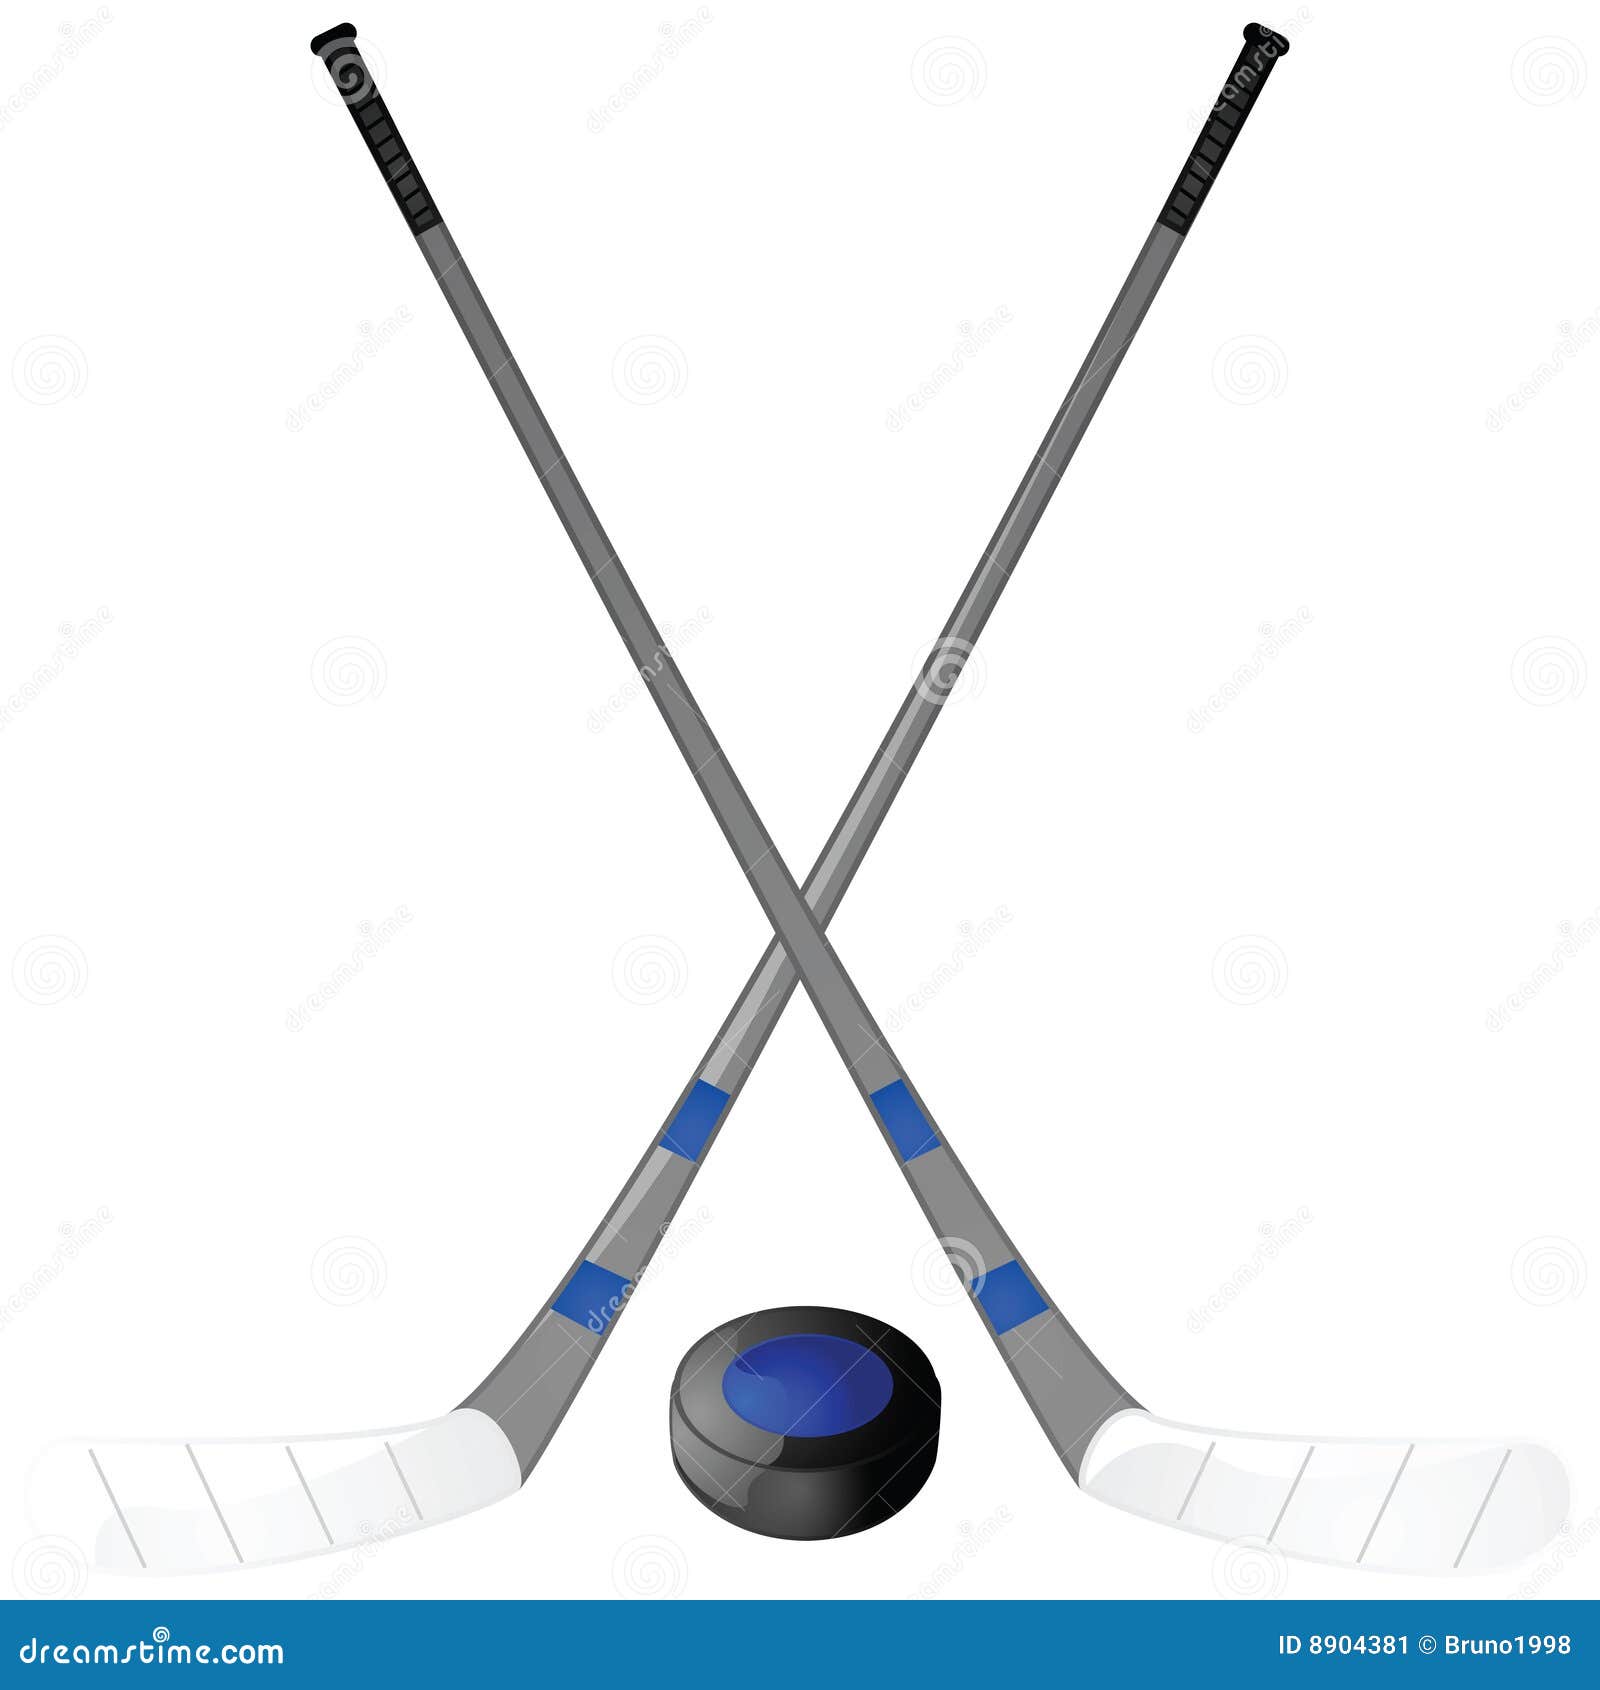 Hockey puck and sticks stock vector. Illustration of ...